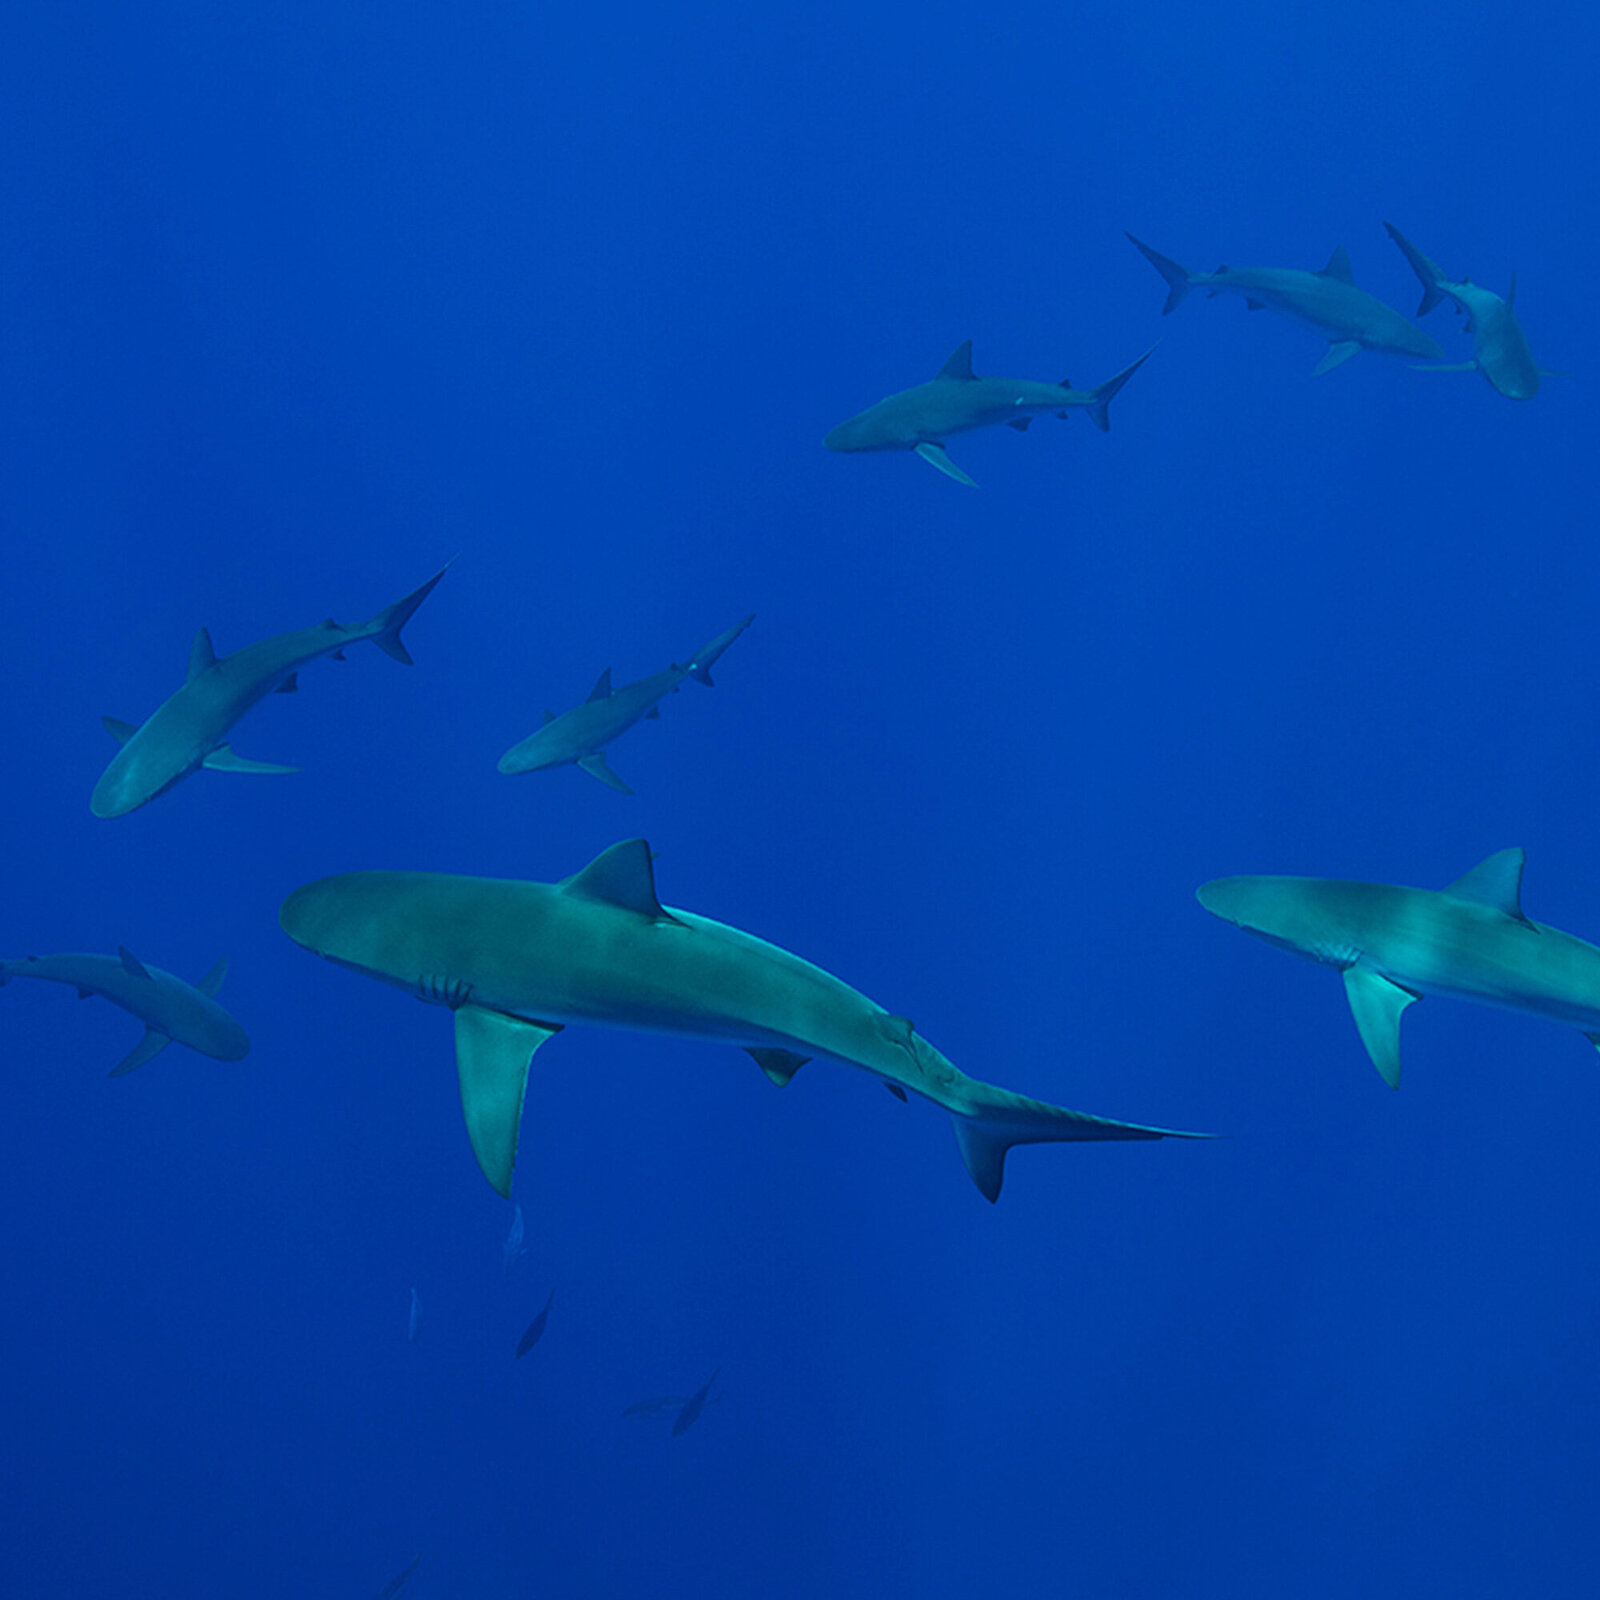 Townsend Majors' photograph of sharks in Hawaii